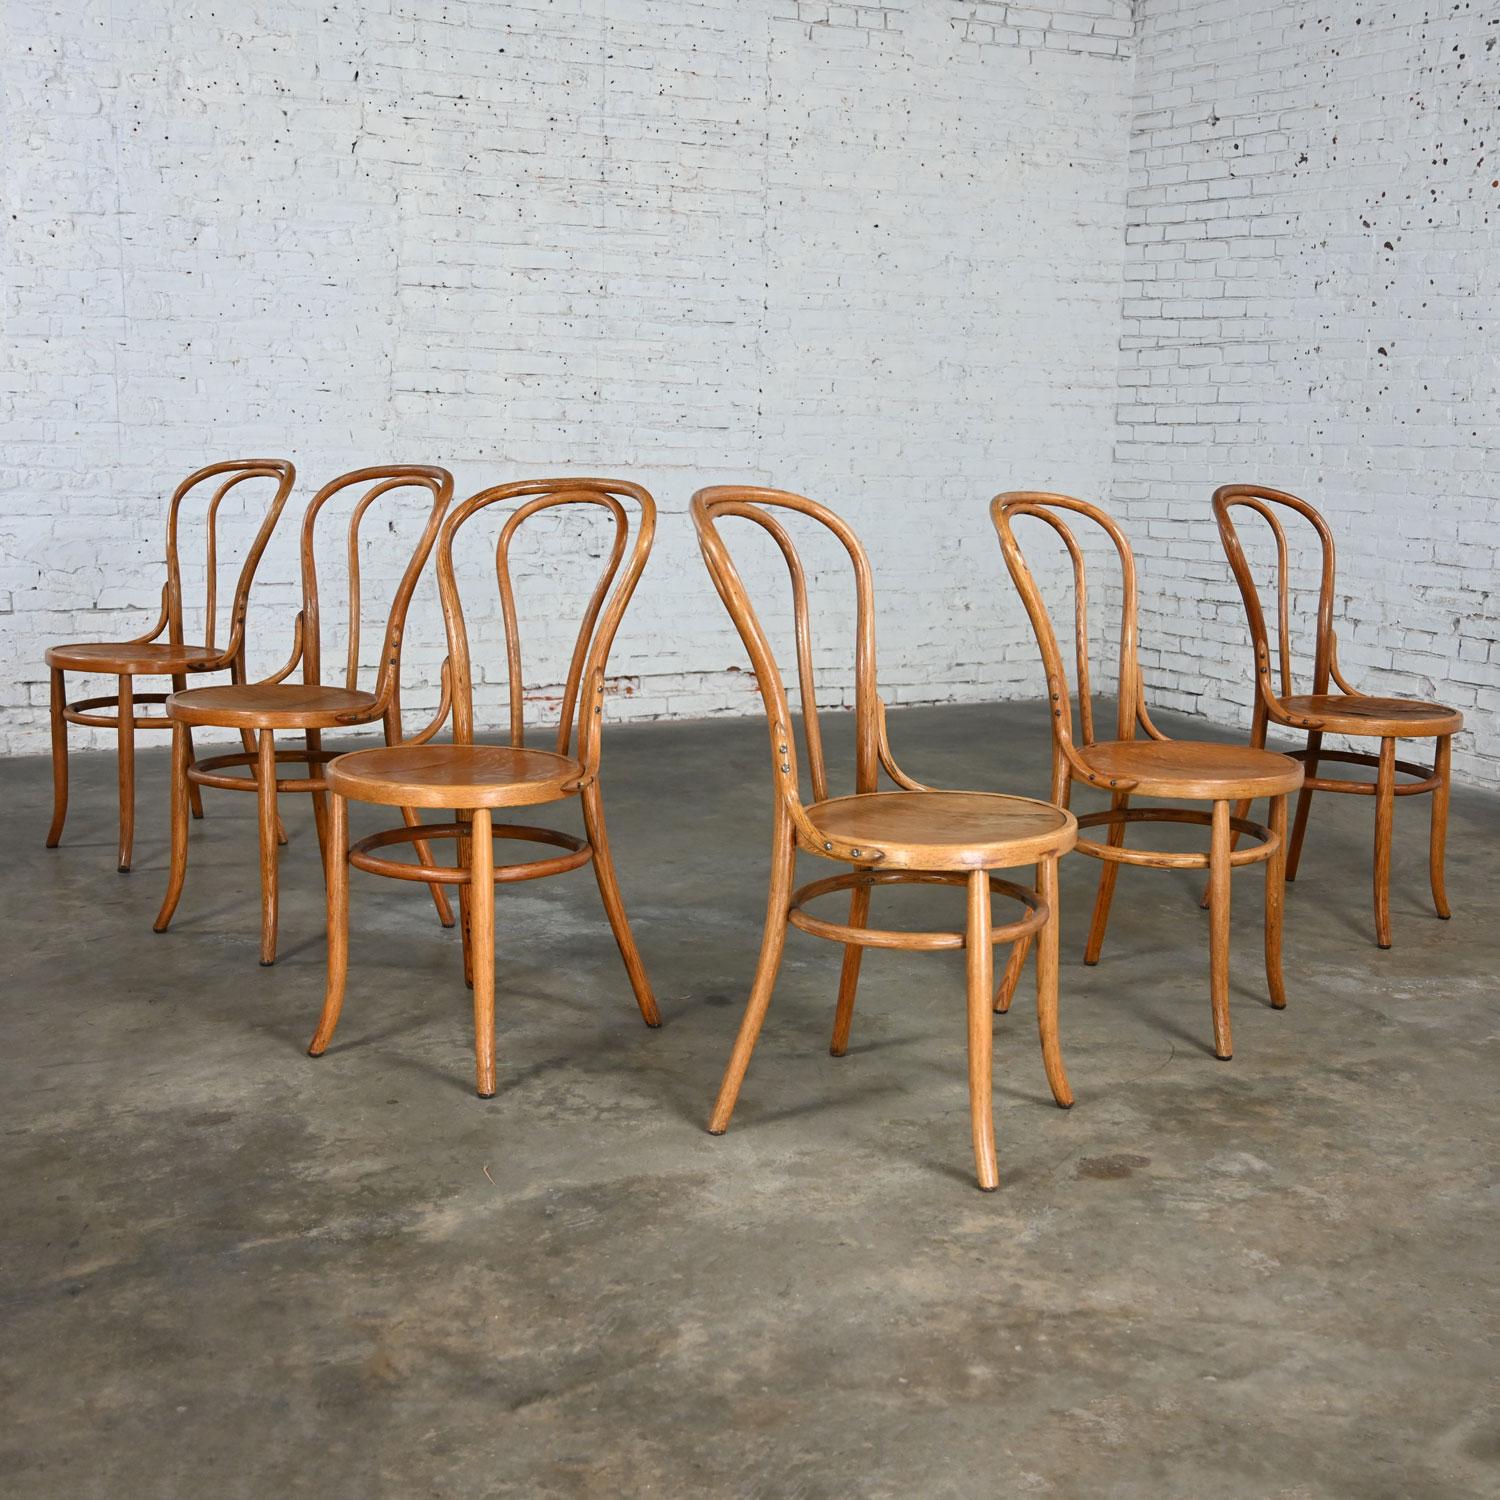 Bauhaus Oak Bentwood Chairs Attributed to Thonet #18 Café Chair Set of 6 For Sale 12